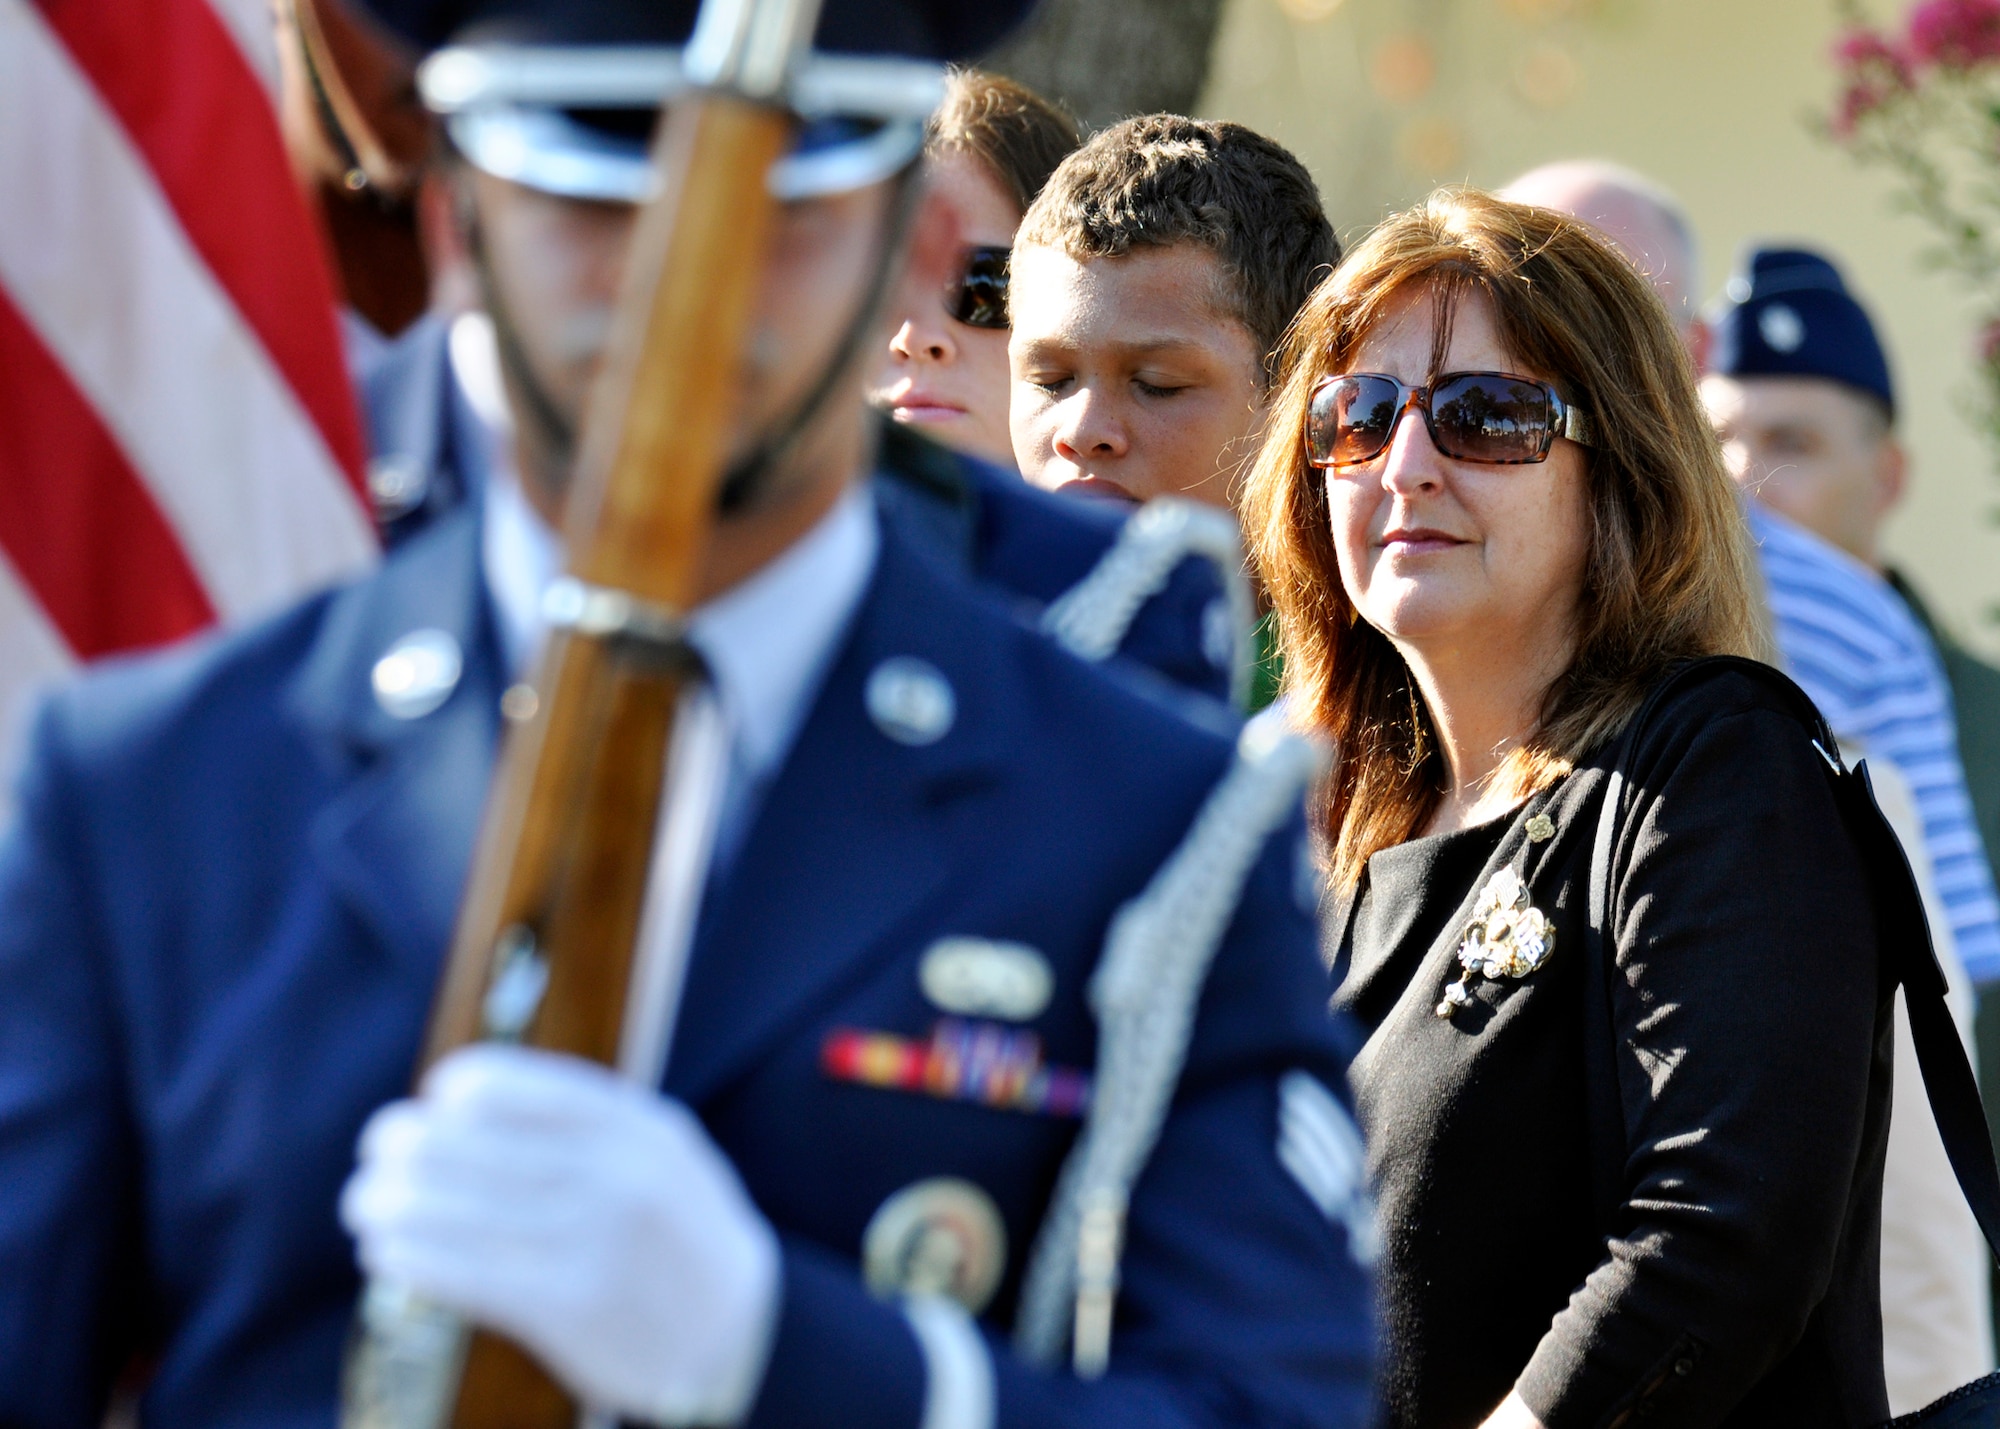 Bridget Brooks, 36th Electronic Warfare Squadron, and other family members of the victims of the Khobar Towers bombing watch as the flag is carried off by the base honor guard during memorial ceremony June 25 at Eglin Air Force Base, Fla.  Mrs. Brooks lost her son, Airman 1st Class Joseph Rimkus, in the attack. Almost 100 friends, family and current members of the 33rd Fighter Wing gathered for a remembrance ceremony near the memorial dedicated to the heroism of 12 Airmen lost. The 33rd FW suffered 105 wounded personnel and accounted for 12 of the 19 Airmen killed in the Khobar Towers terrorist attack June 25, 1996. (U.S. Air Force Photo/ Samuel King Jr.) 